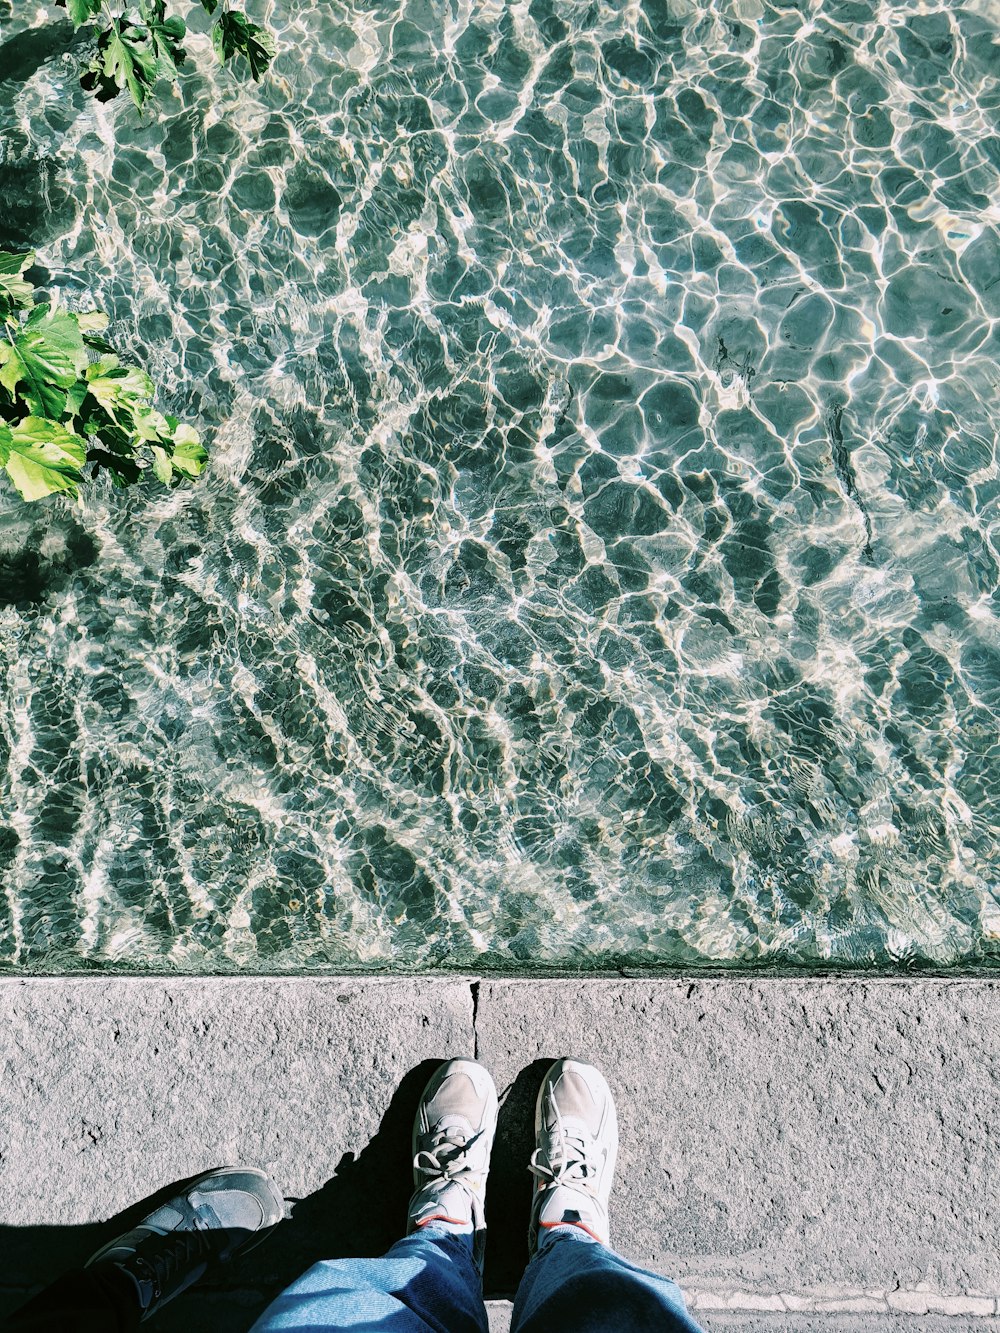 a group of people's feet on a stone surface